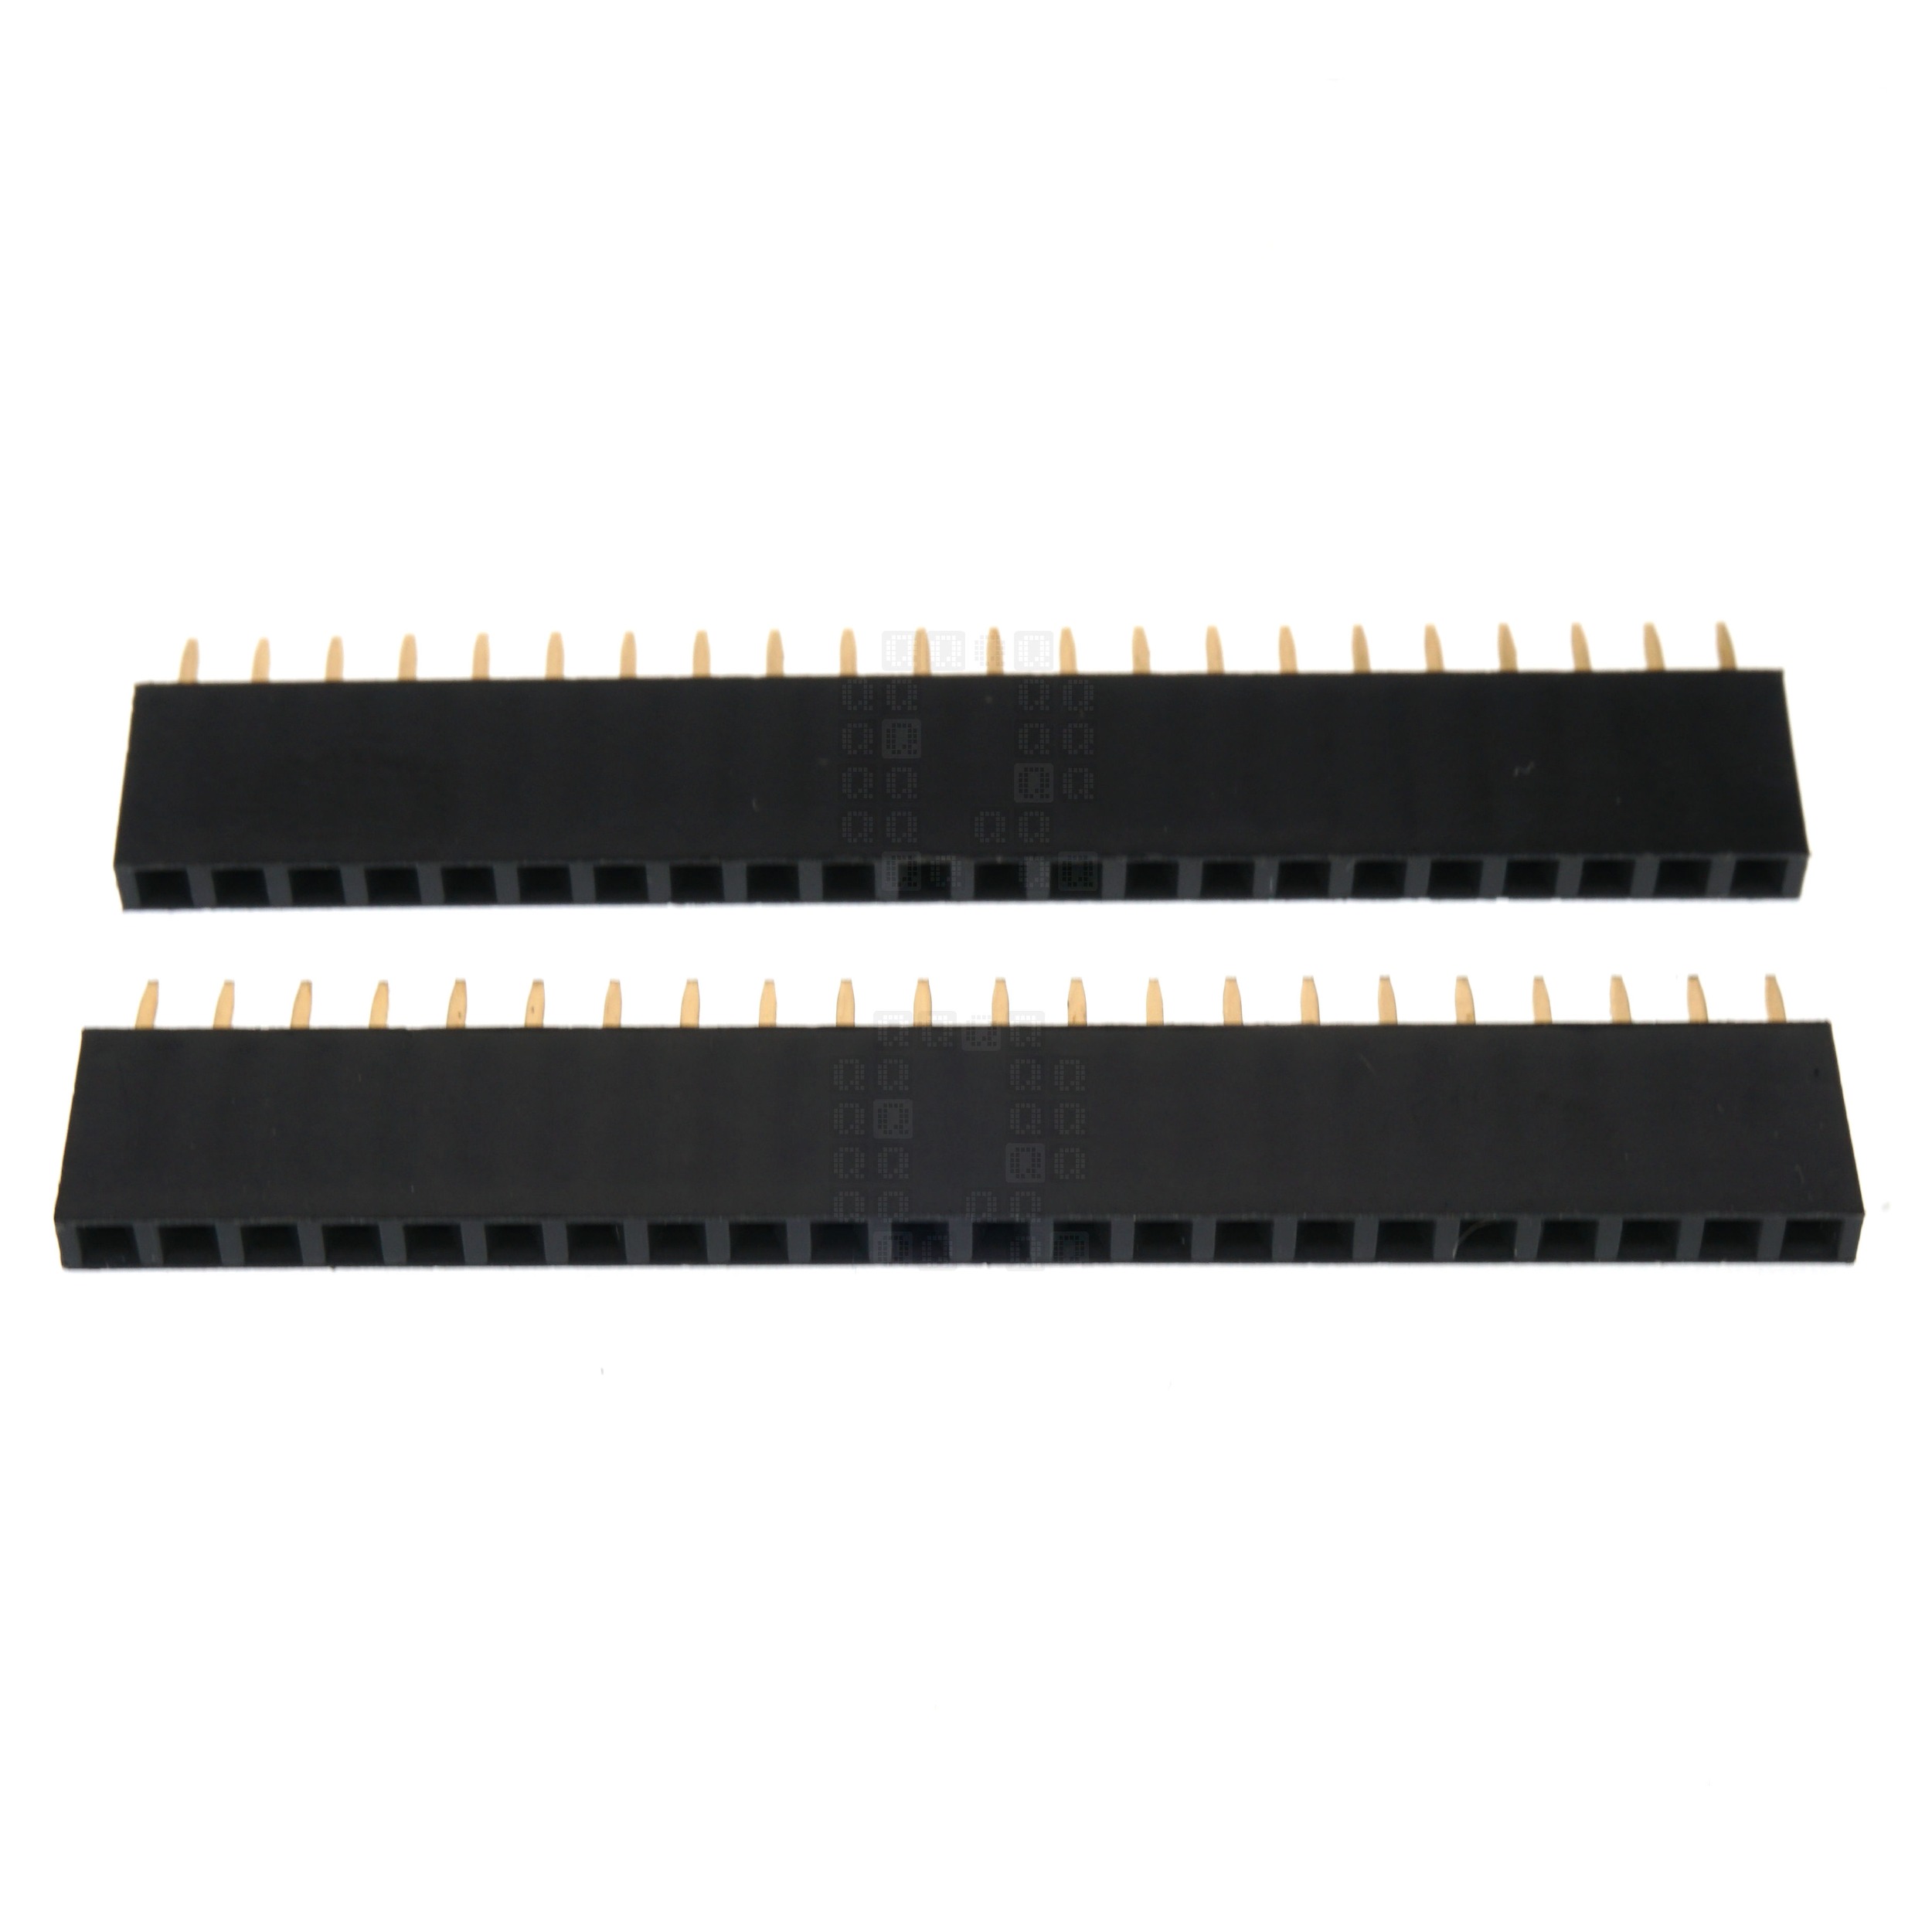 1x22 Single Row Female Straight Pin Header, 2.54mm Pitch, 2-Pack